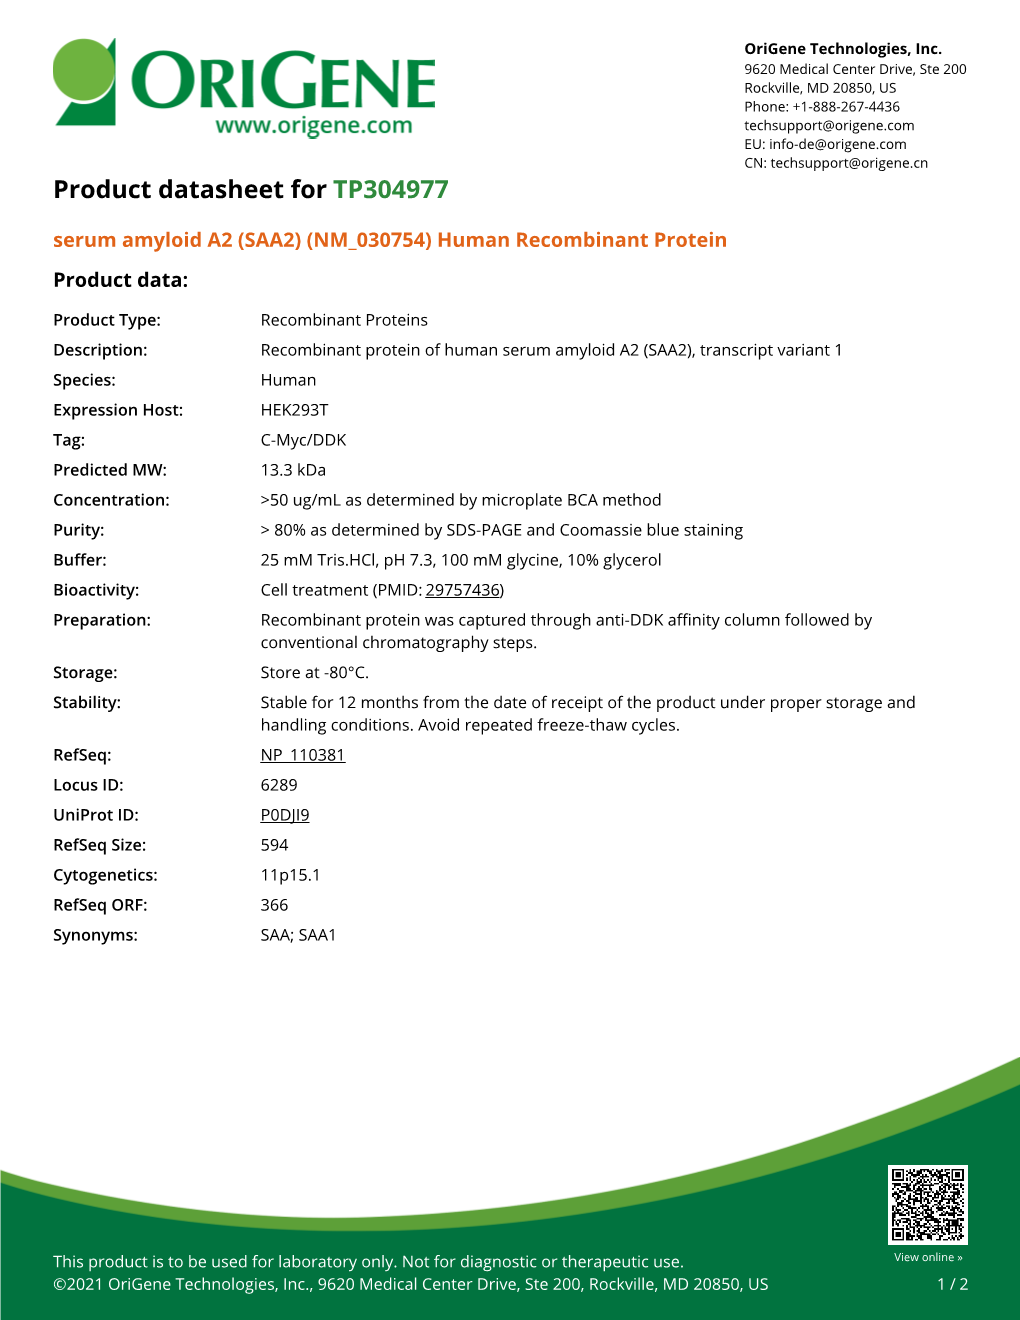 (SAA2) (NM 030754) Human Recombinant Protein Product Data